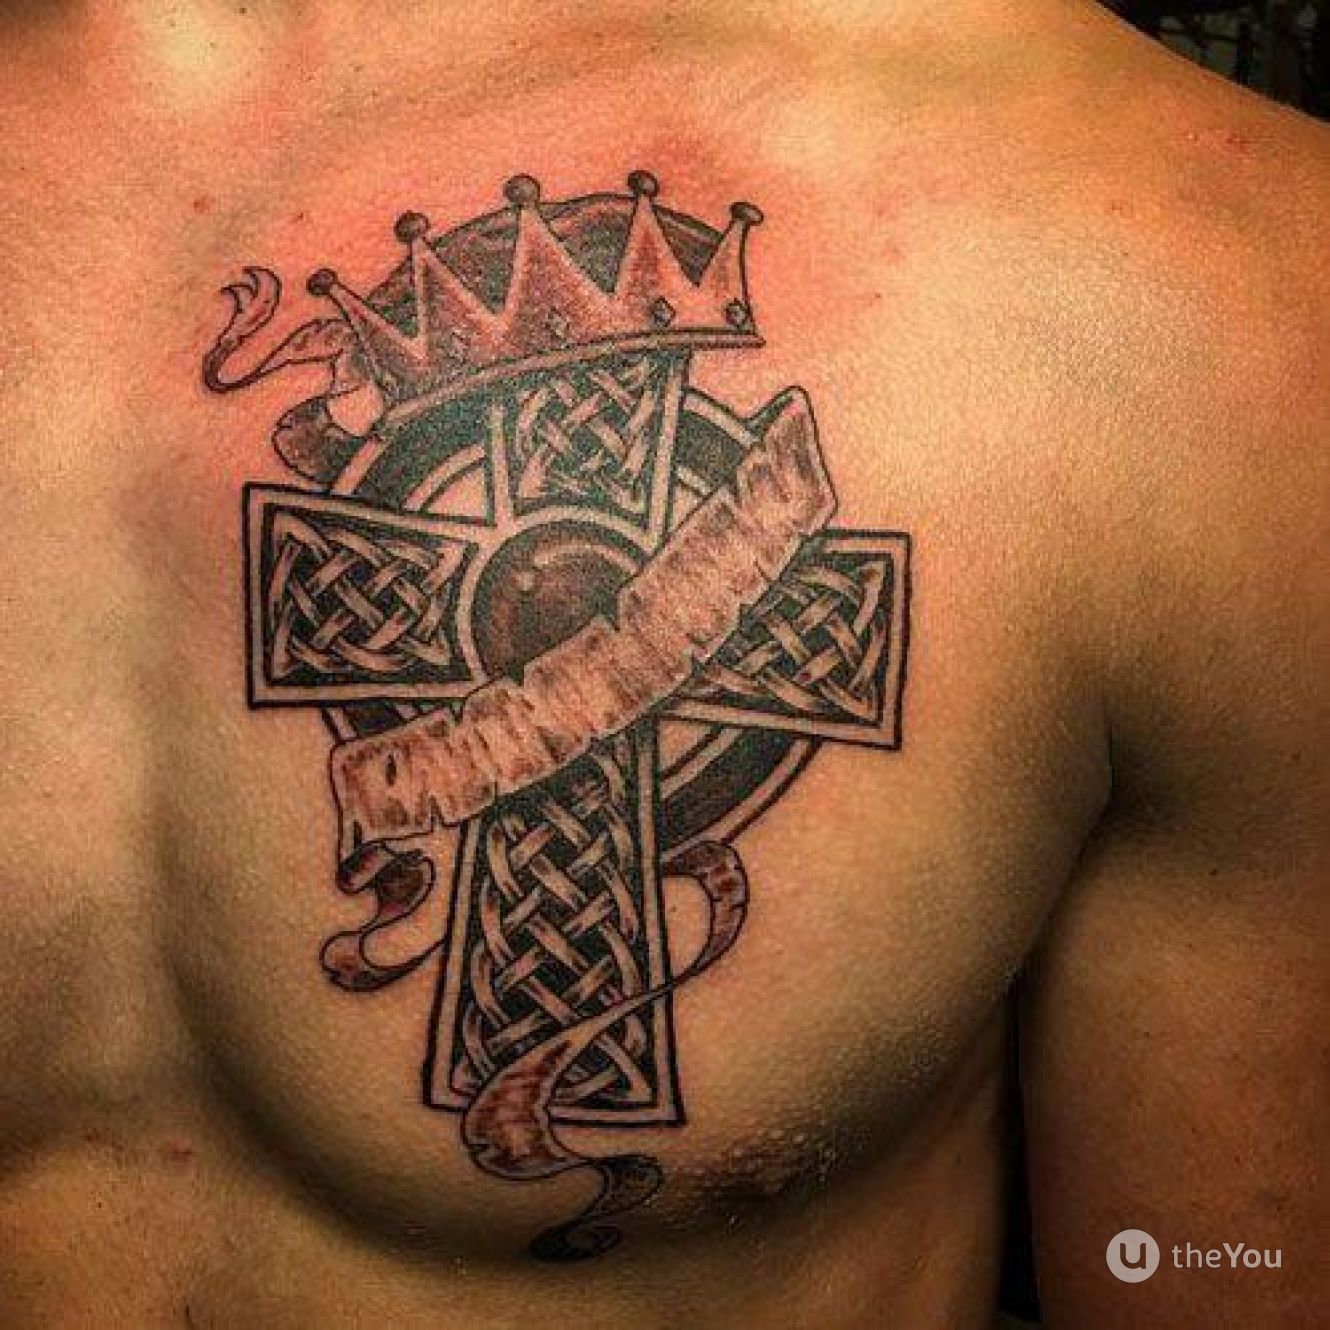 Cross Pictures For Men Chest - Image Meaning Ideas